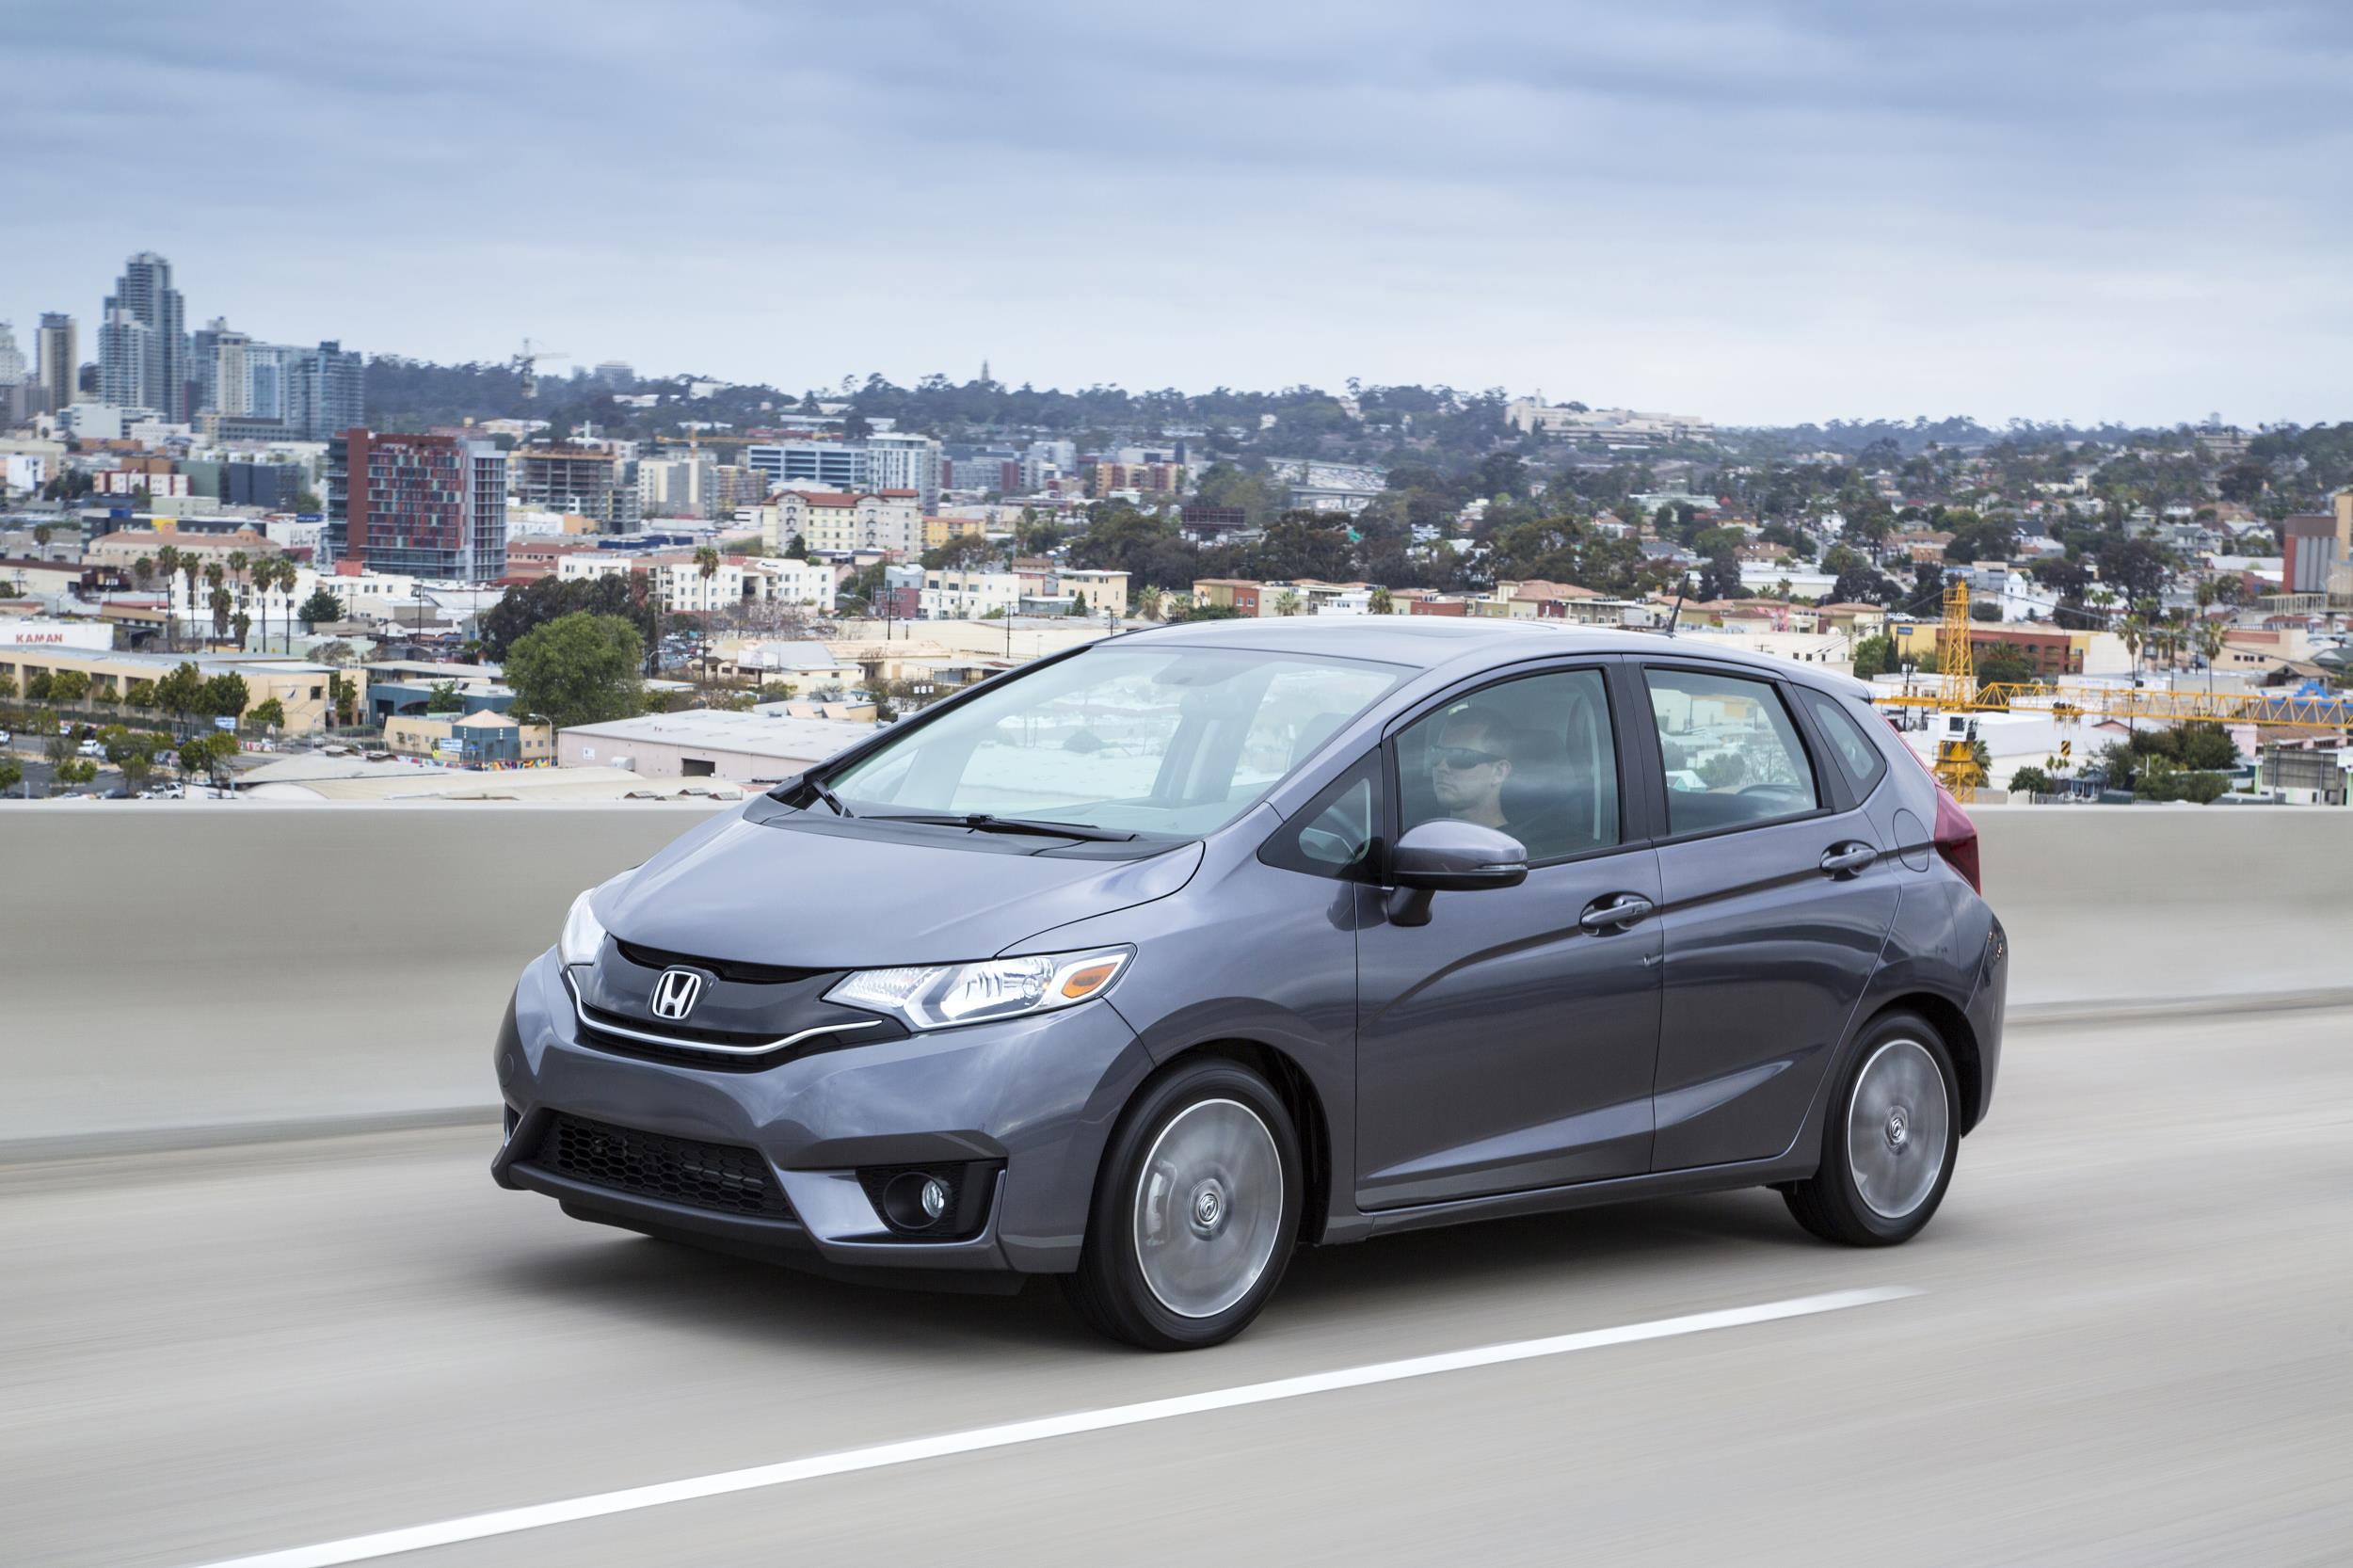 2017 Honda Fit Priced From $16,825 - autoevolution